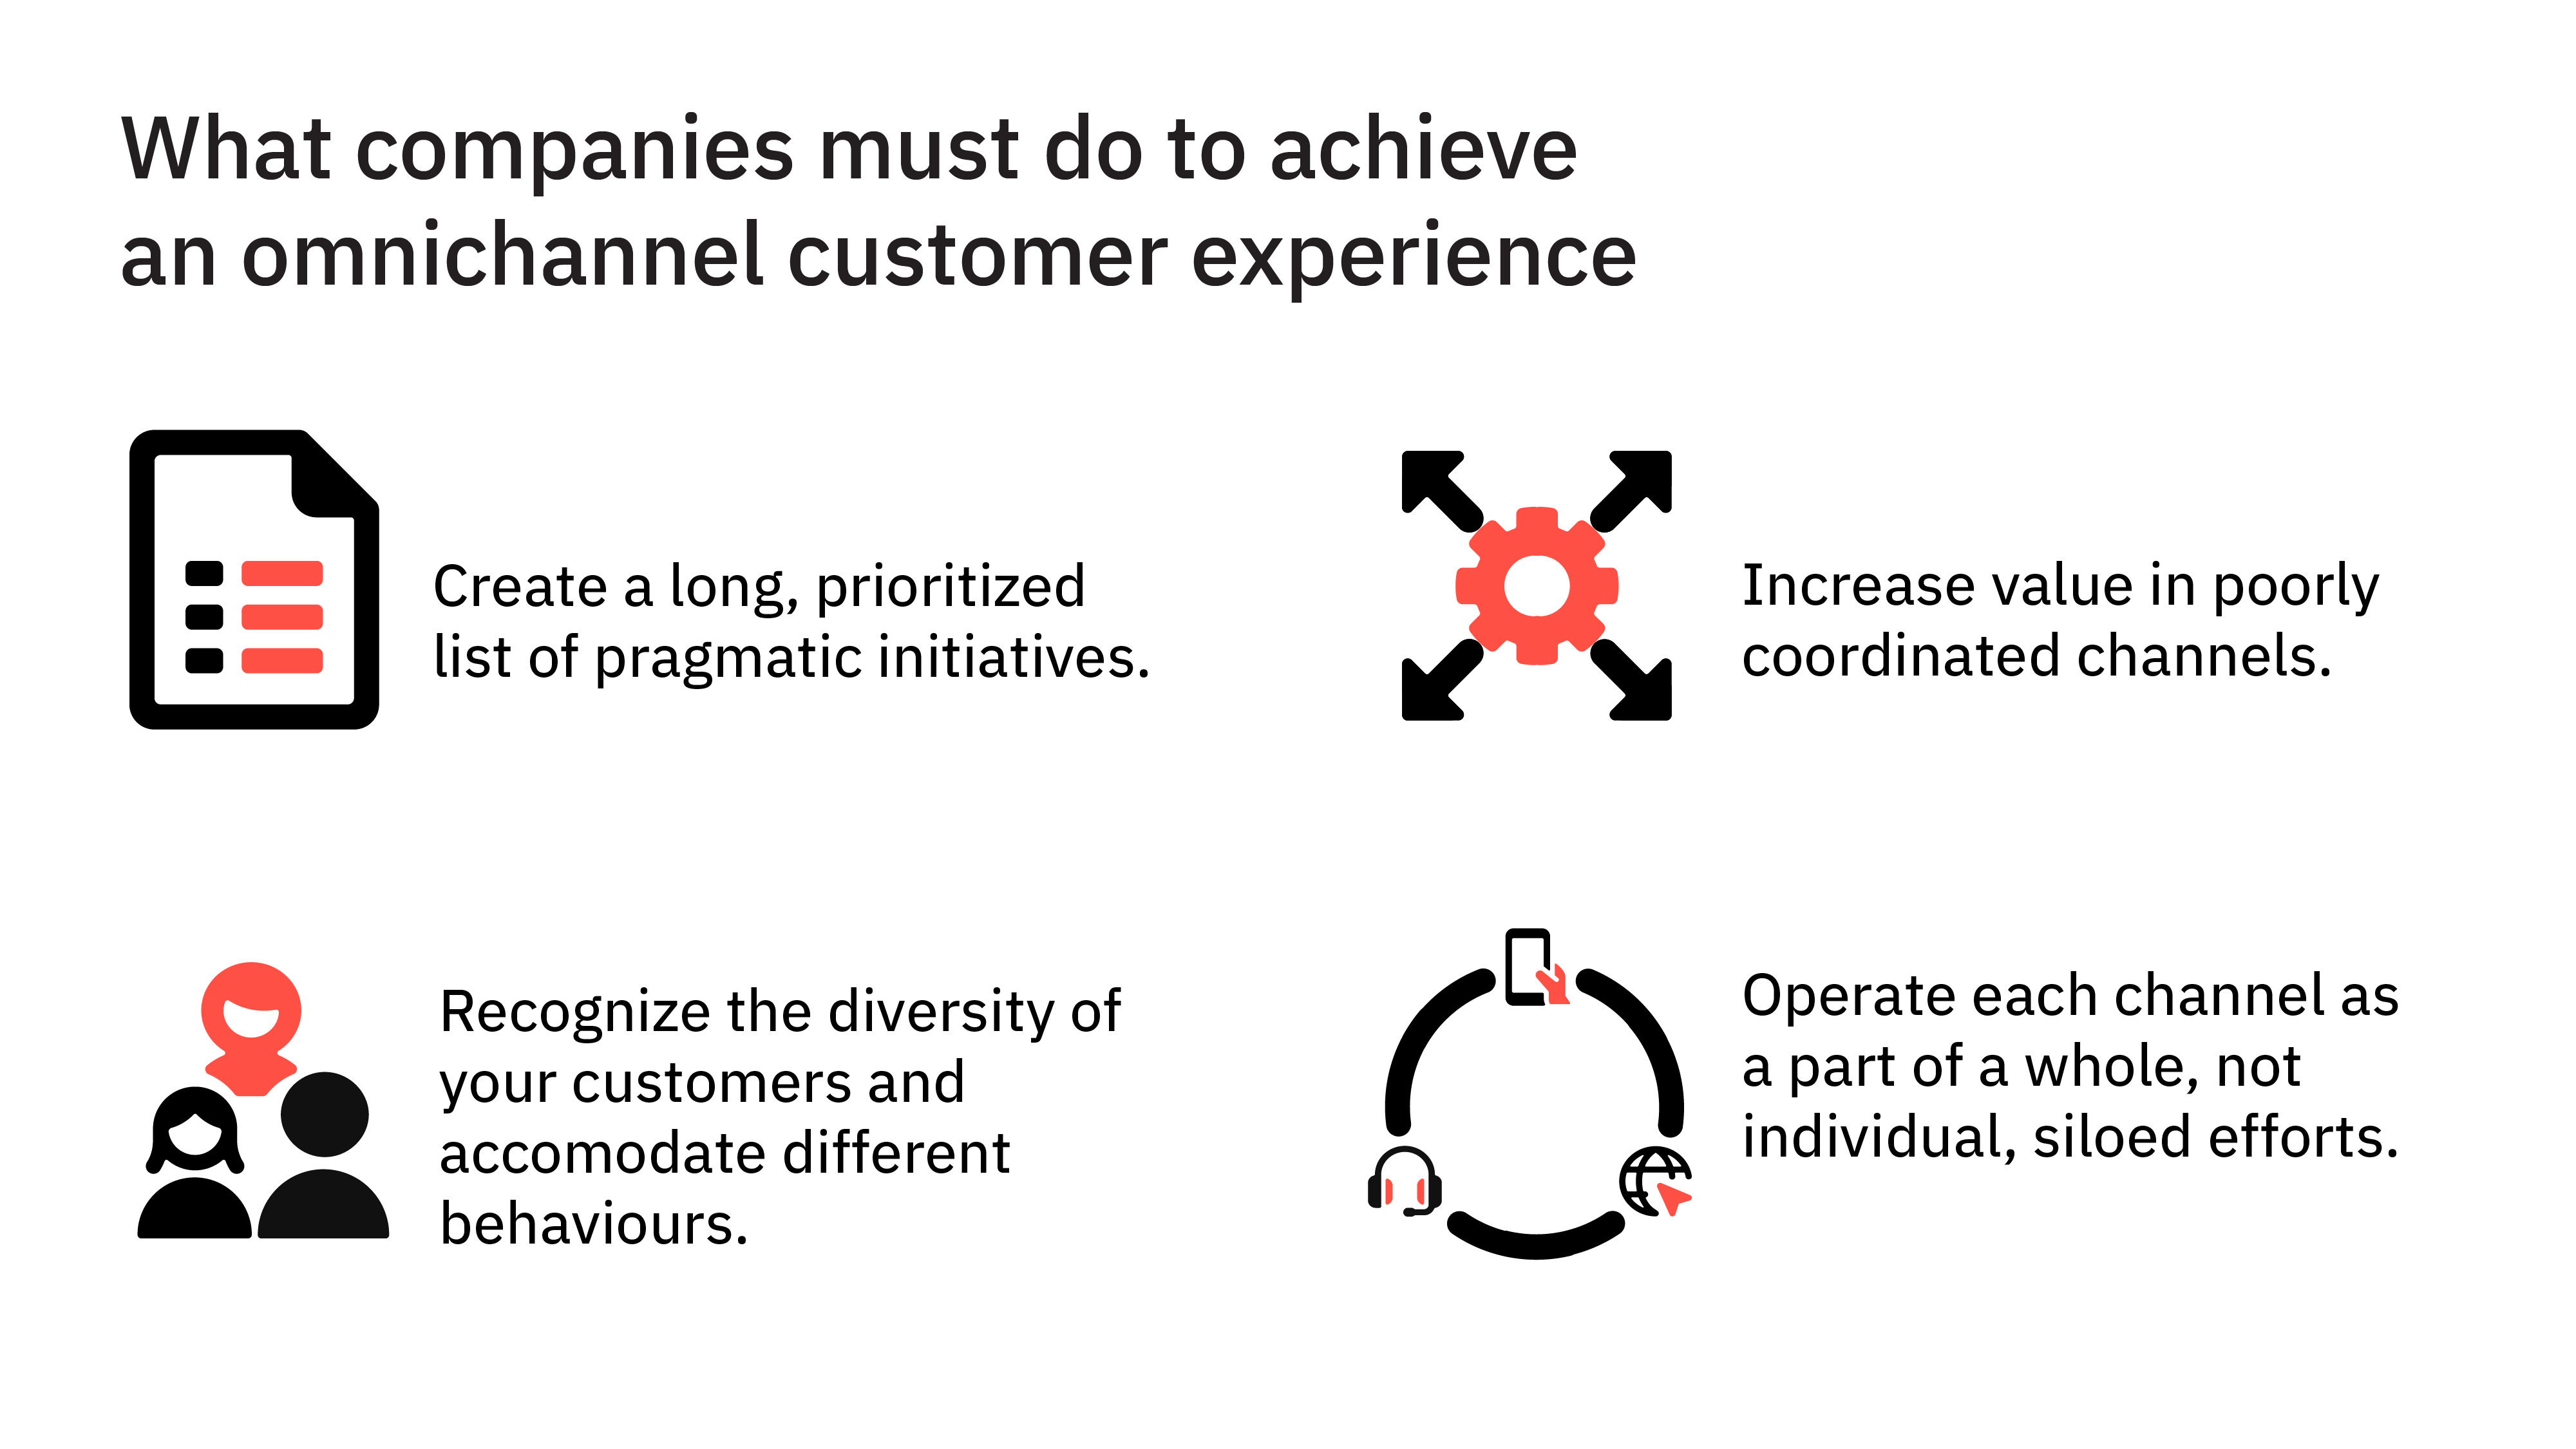 What companies must do to achieve an omnichannel experience